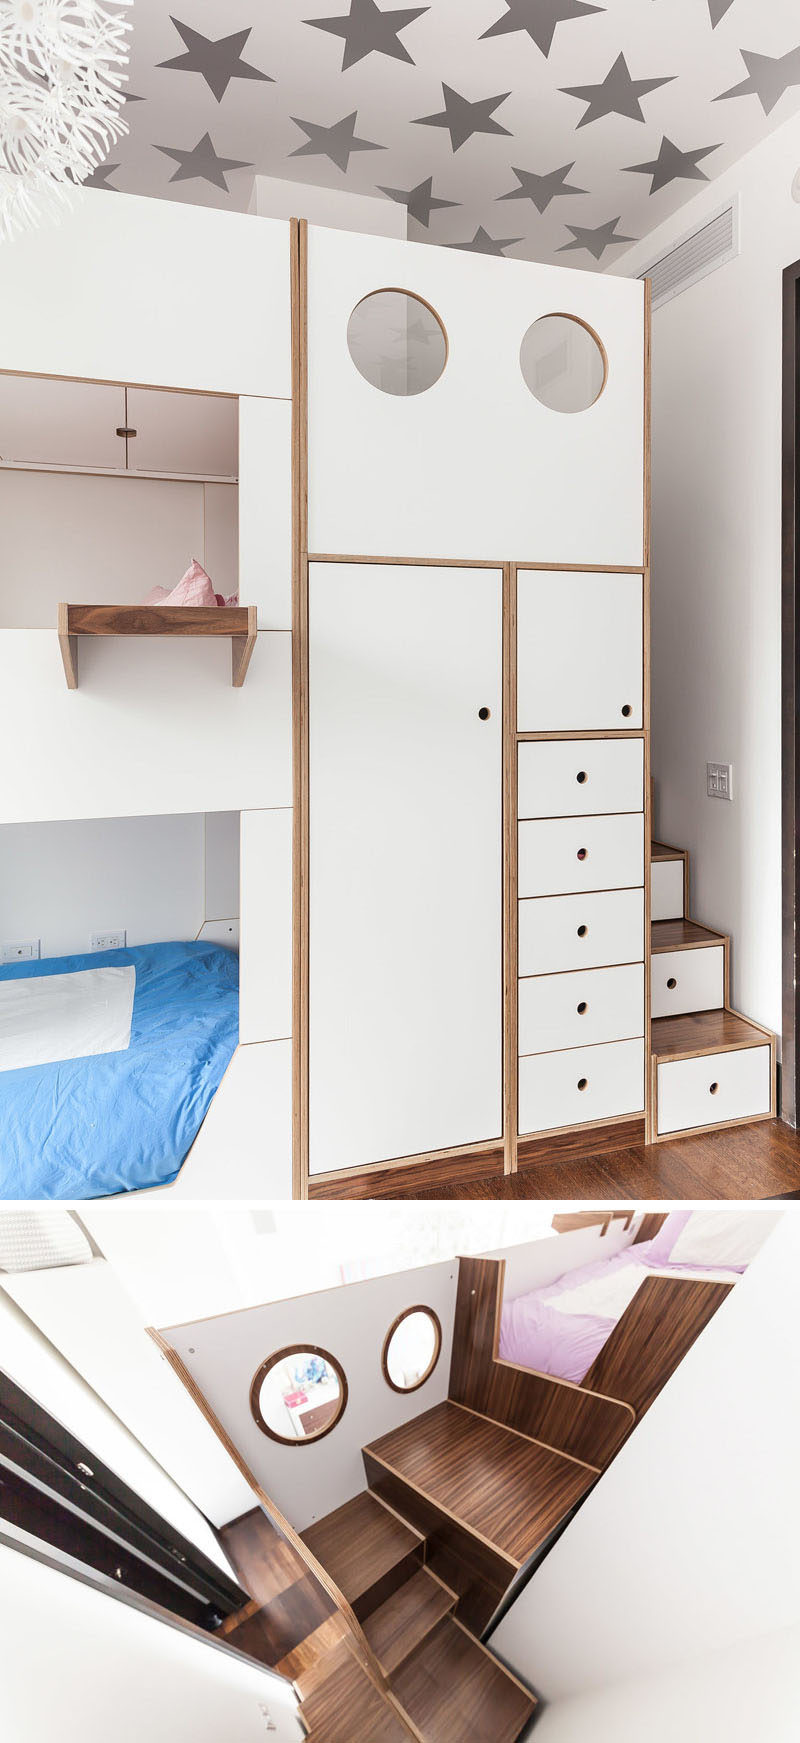 This modern triple bunk bed has two dedicated sets of stairs for the middle and top bunks, built-in storage, and hanging tray tables for each bed. #BunkBed #TripleBunkBed #KidsRoom #Bedroom #ModernBedroom